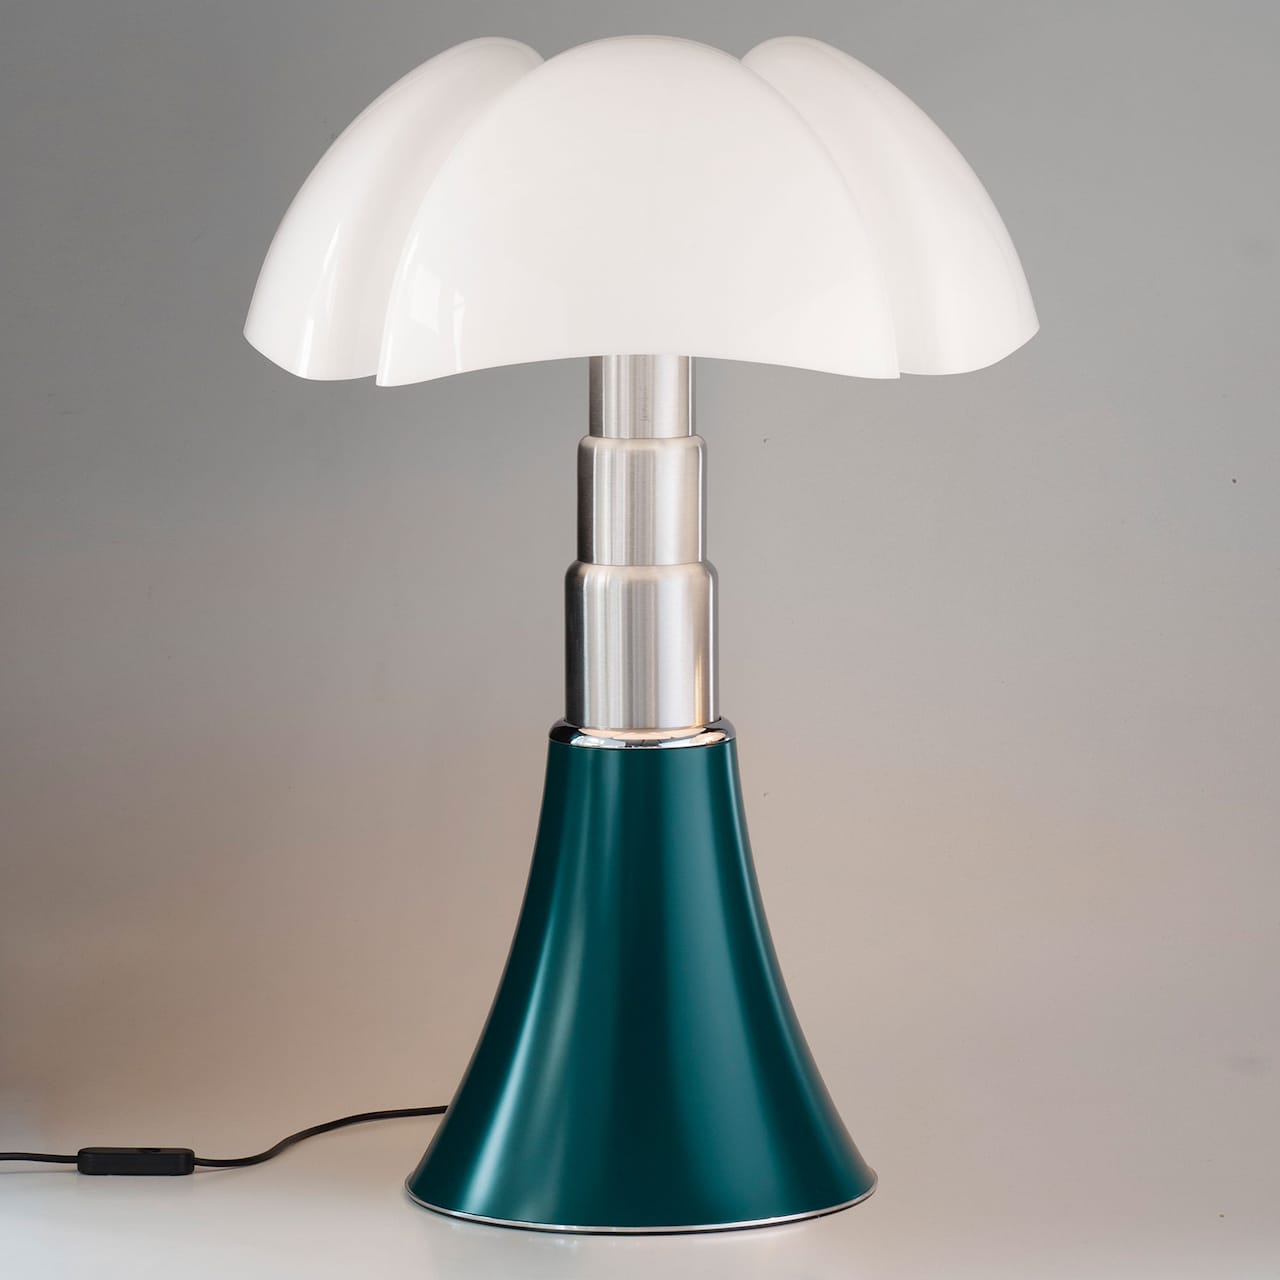 Pipistrello Medium Table Lamp, Agave Green - Dimmable